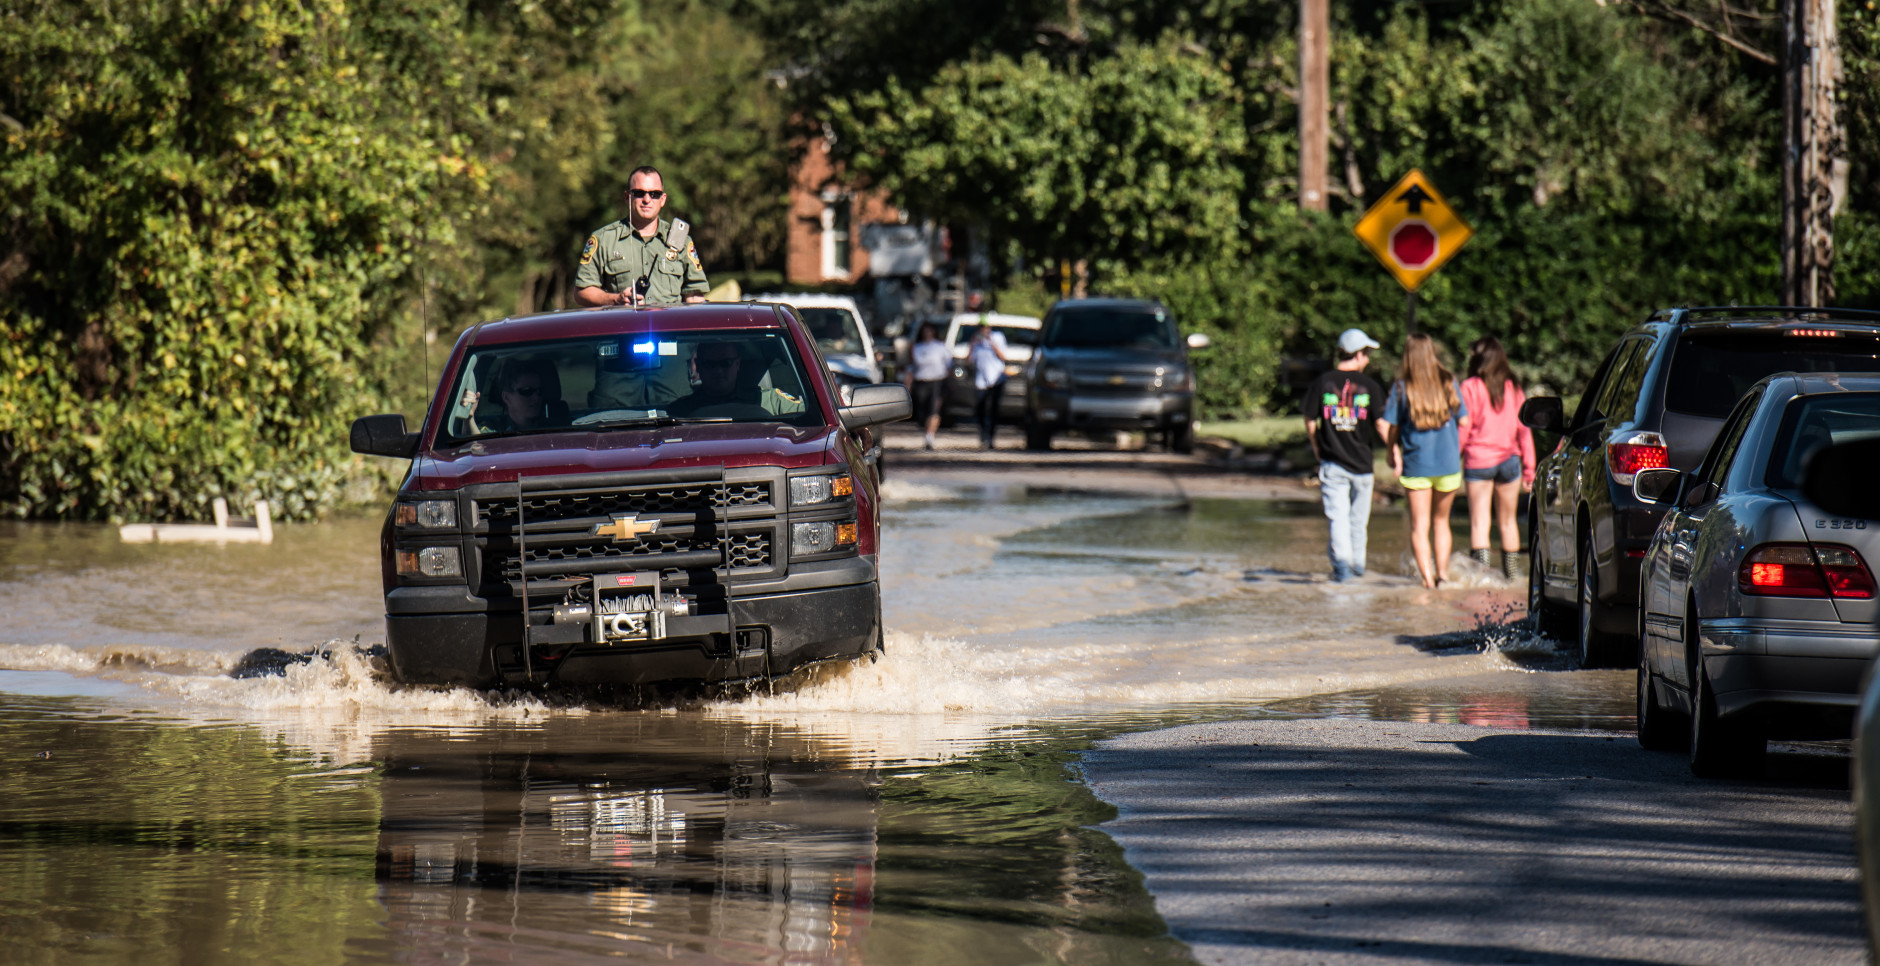 COLUMBIA, SC - OCTOBER 6:   October , 2015 in Columbia, South Carolina. The state of South Carolina experienced record rainfall amounts over the weekend and continues to face resulting flooding. (Photo by Sean Rayford/Getty Images)